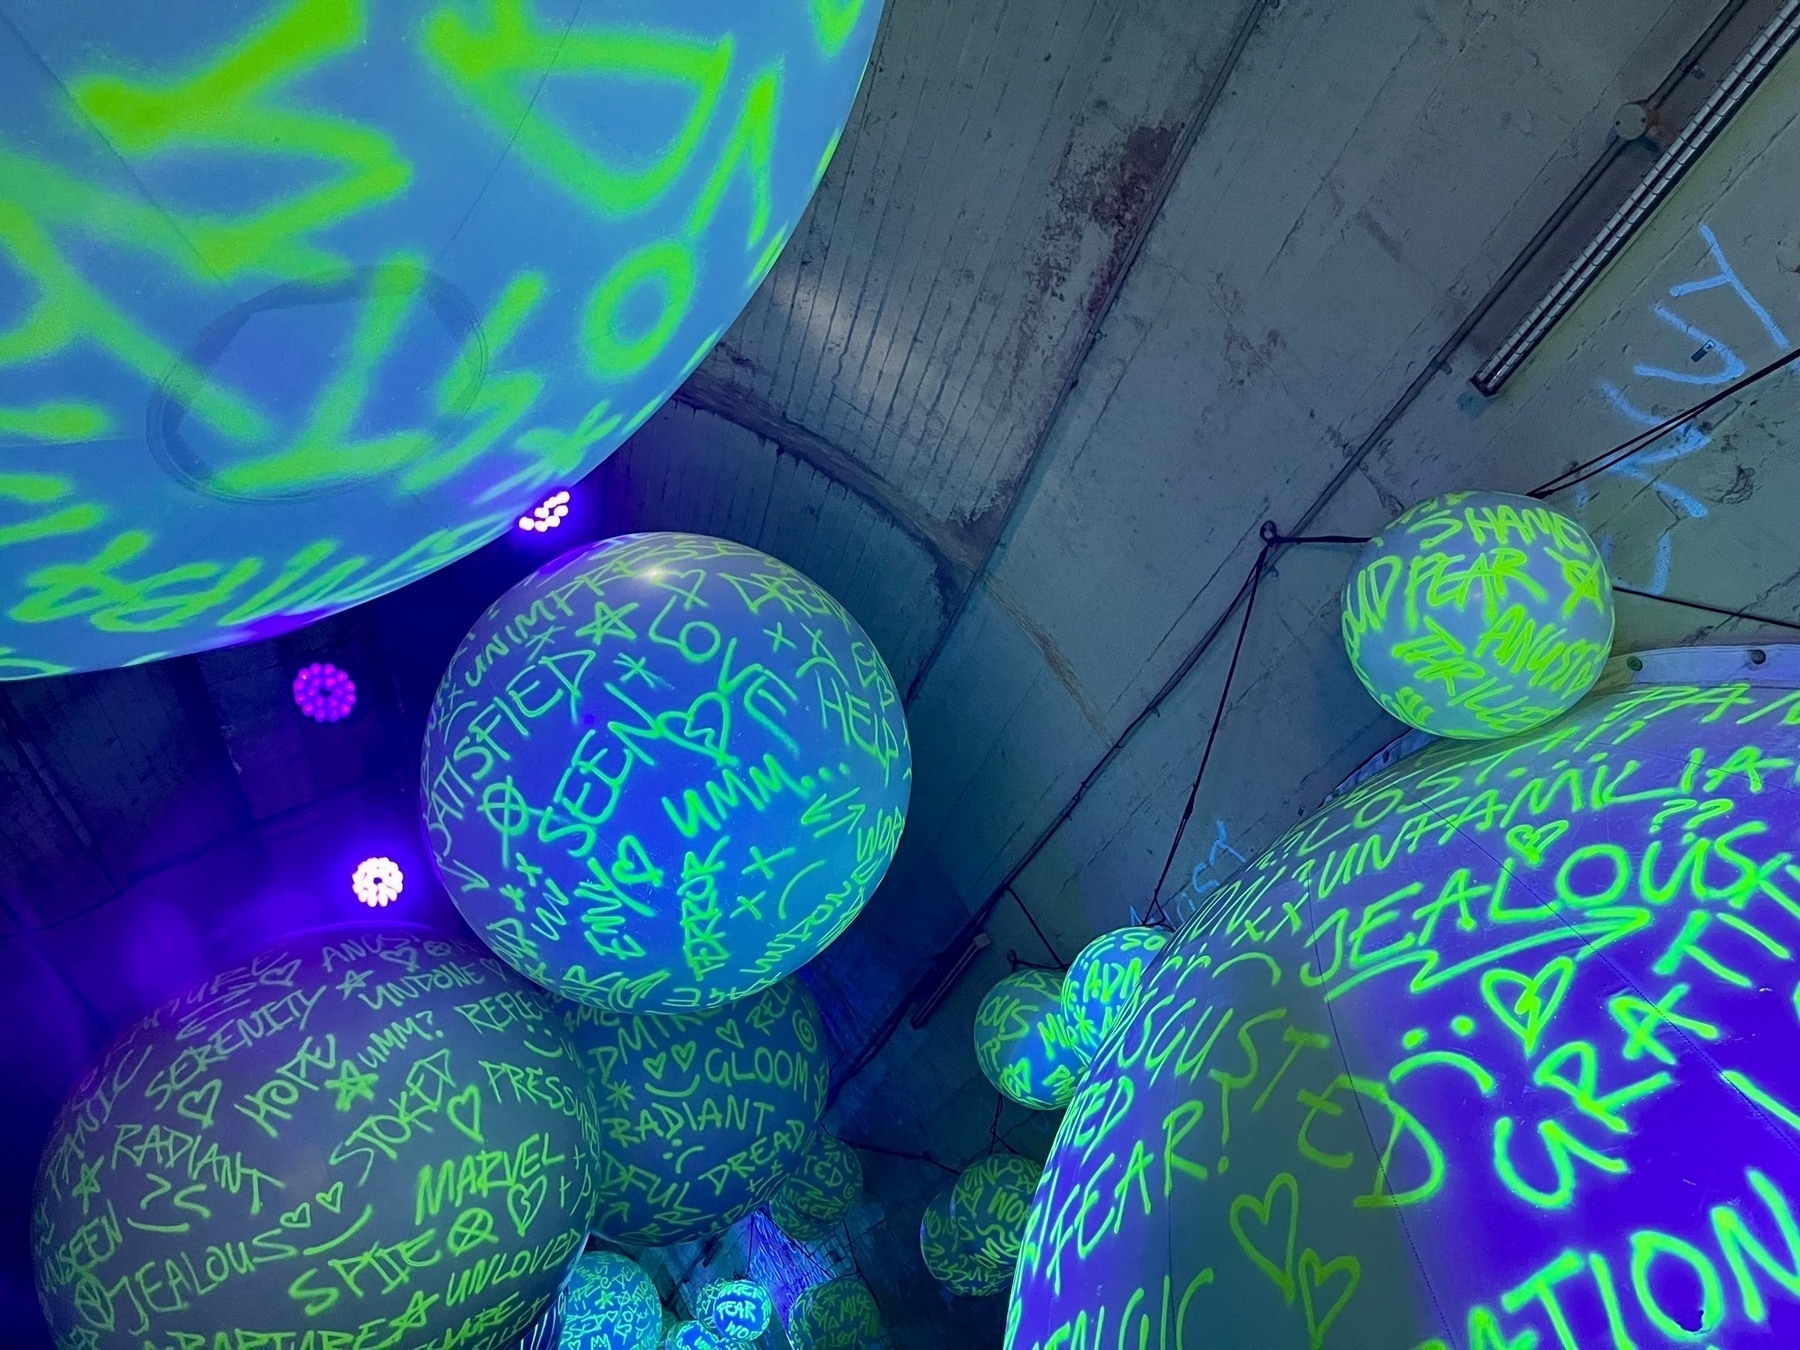 Unseen stage: illuminated, coloured balls displaying writing